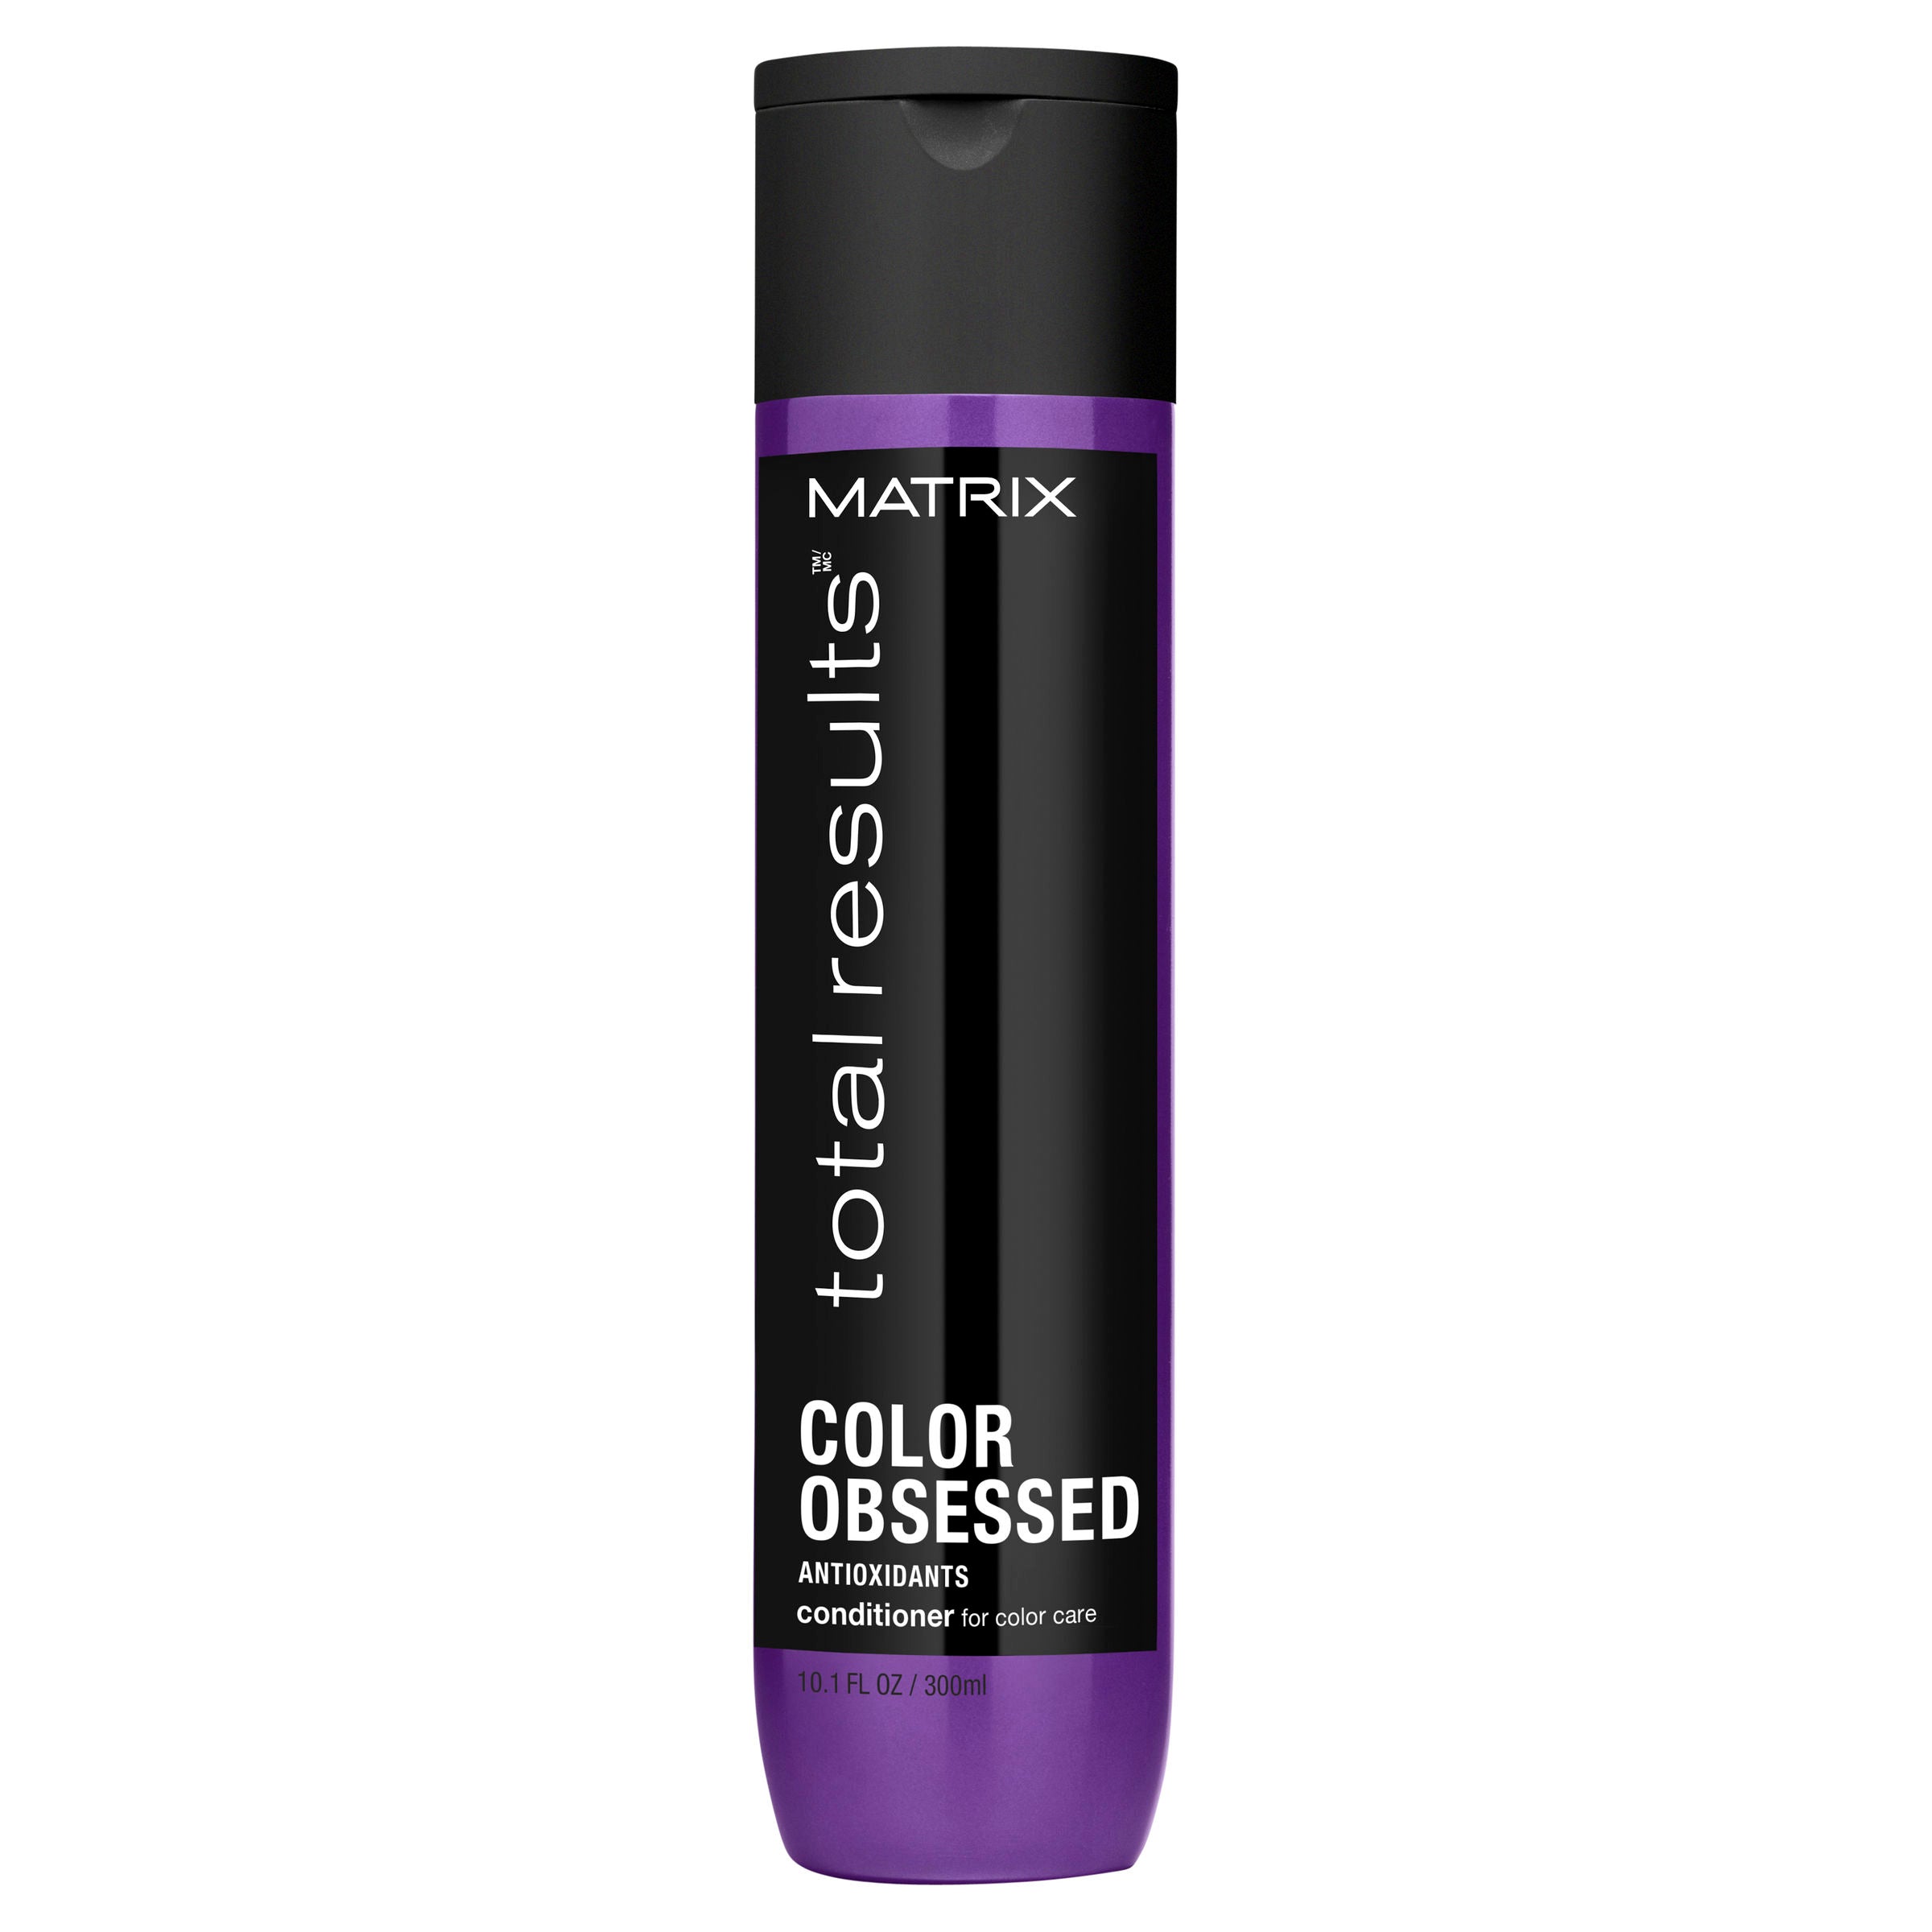 Matrix Total Results Color Obsessed Conditioner helps protect against fading and extends the life of colour vibrancy - 300 ml